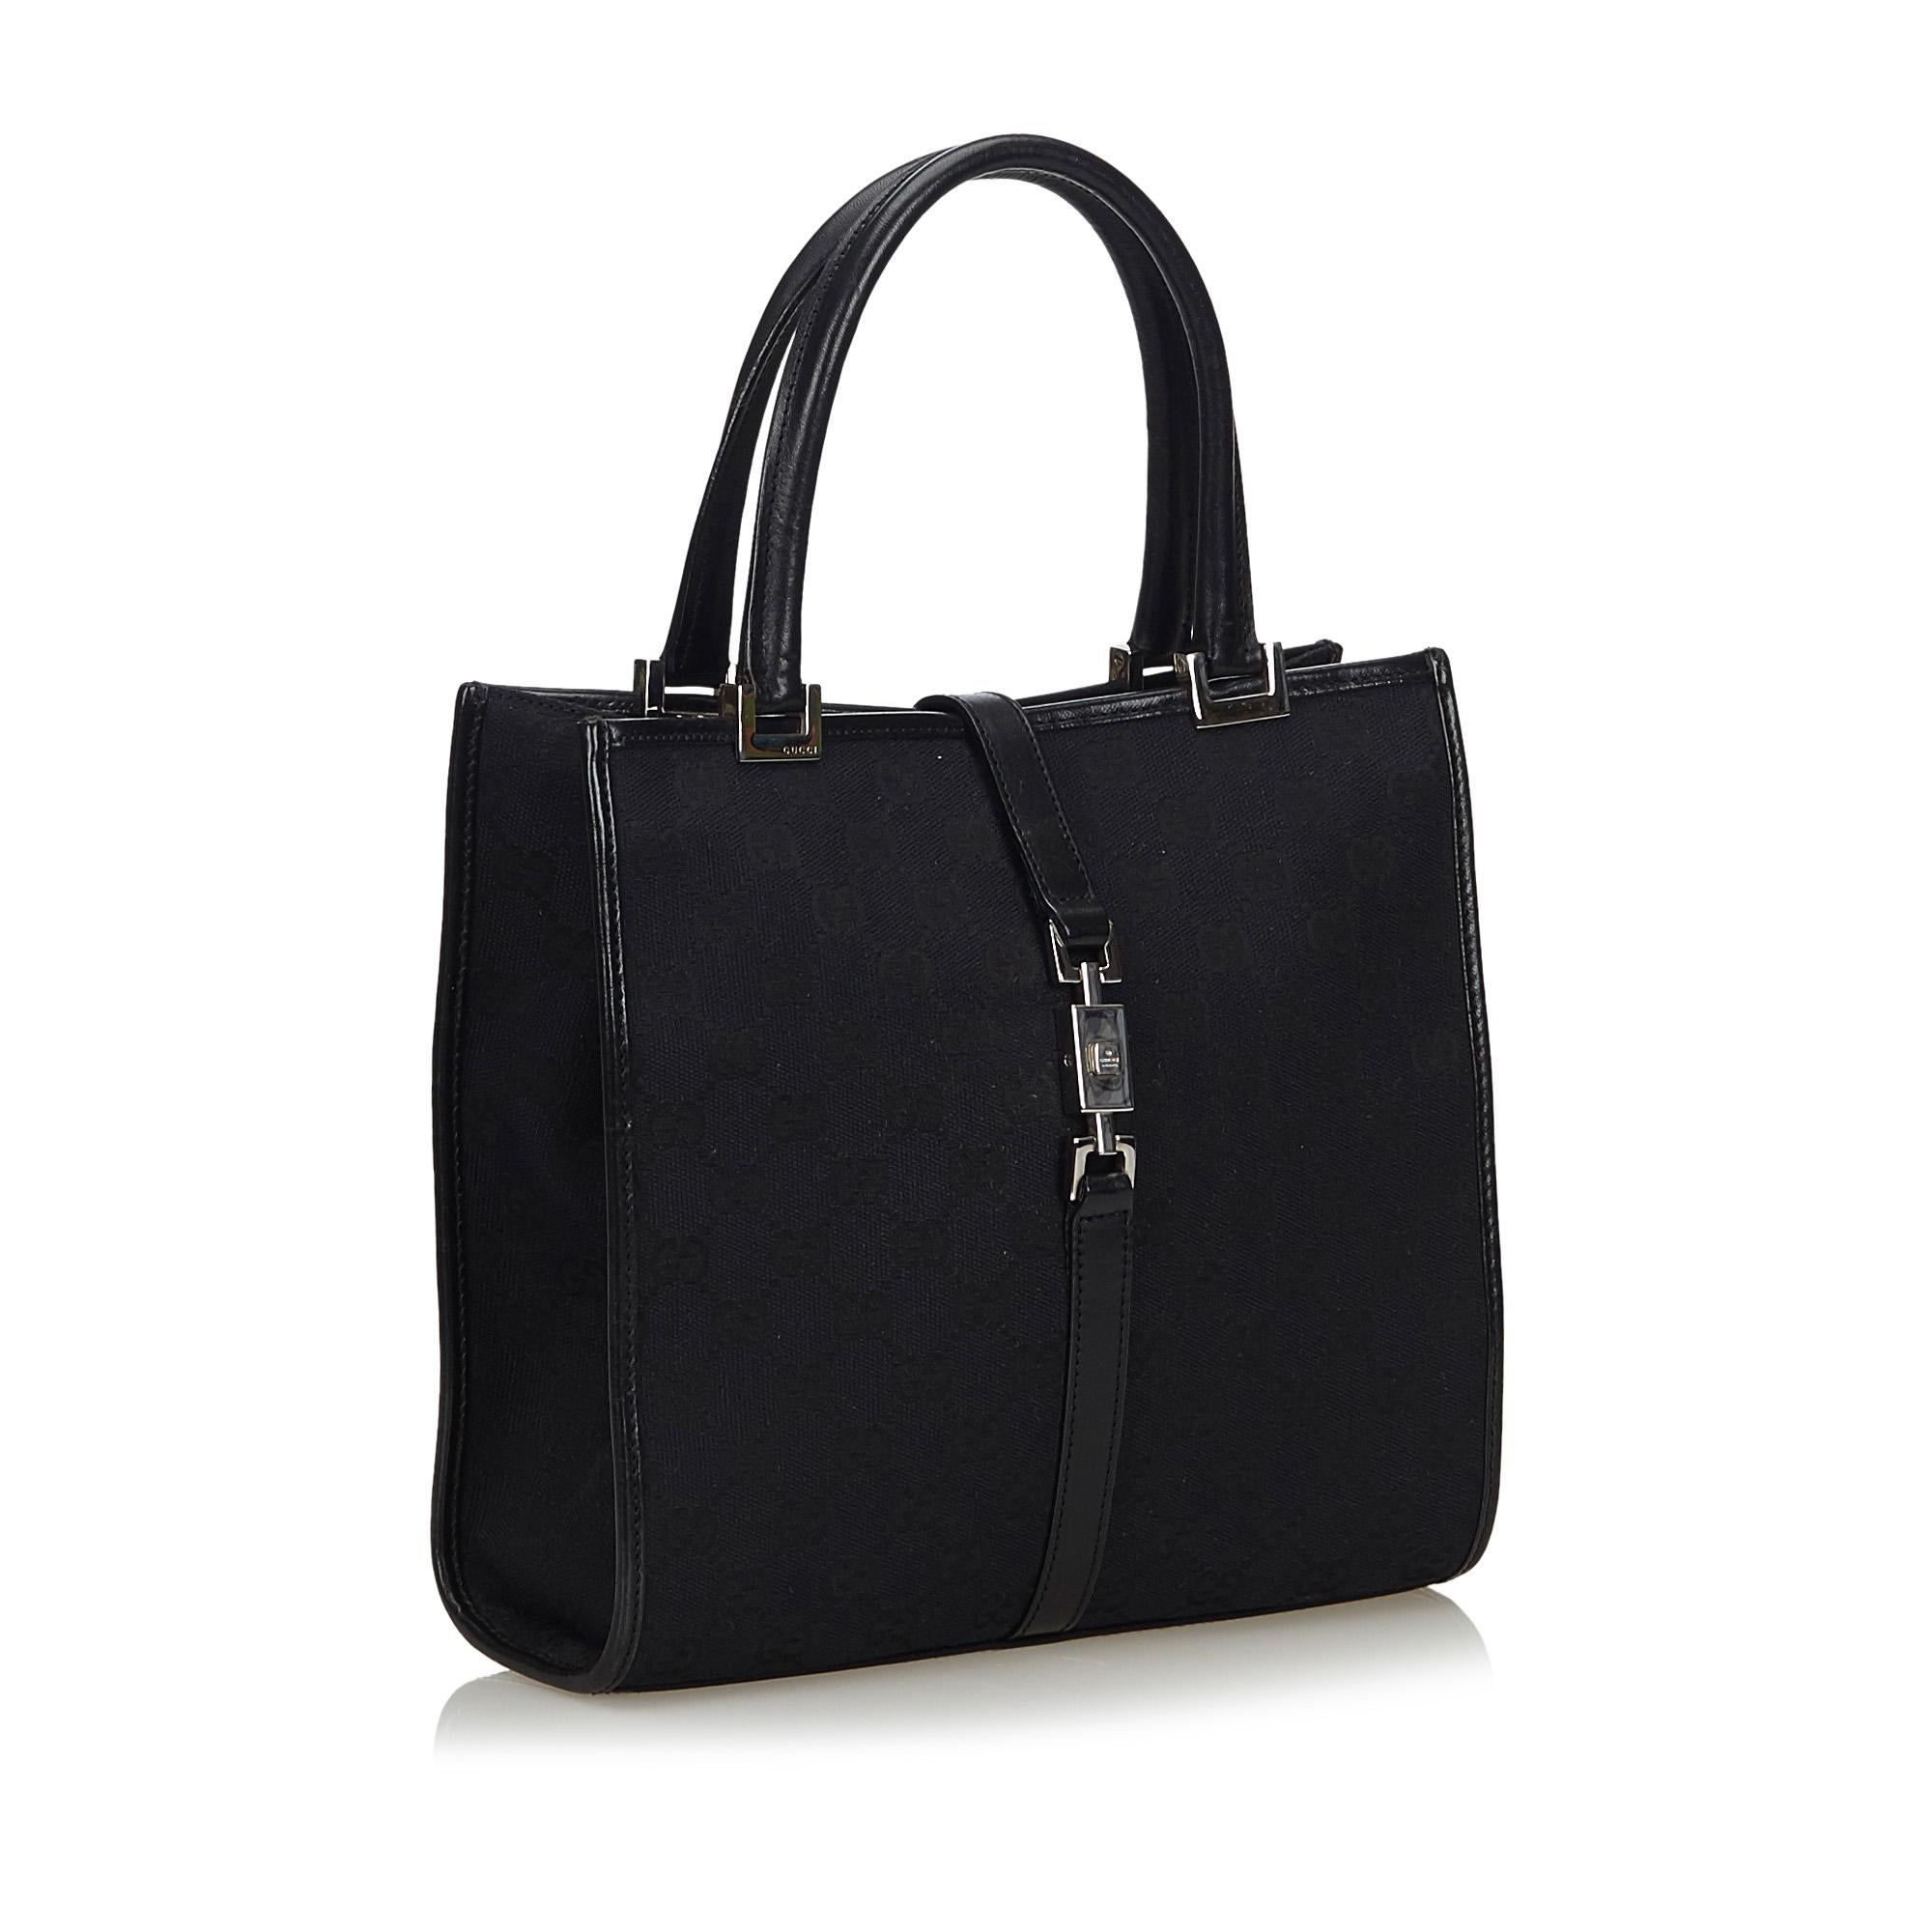 The Jackie tote bag features a canvas body with leather trim, rolled leather handles, a top strap with a metal closure, an open top, and an interior zip pocket. It carries as B+ condition rating.

Inclusions: 
Dust Bag

Dimensions:
Length: 22.00